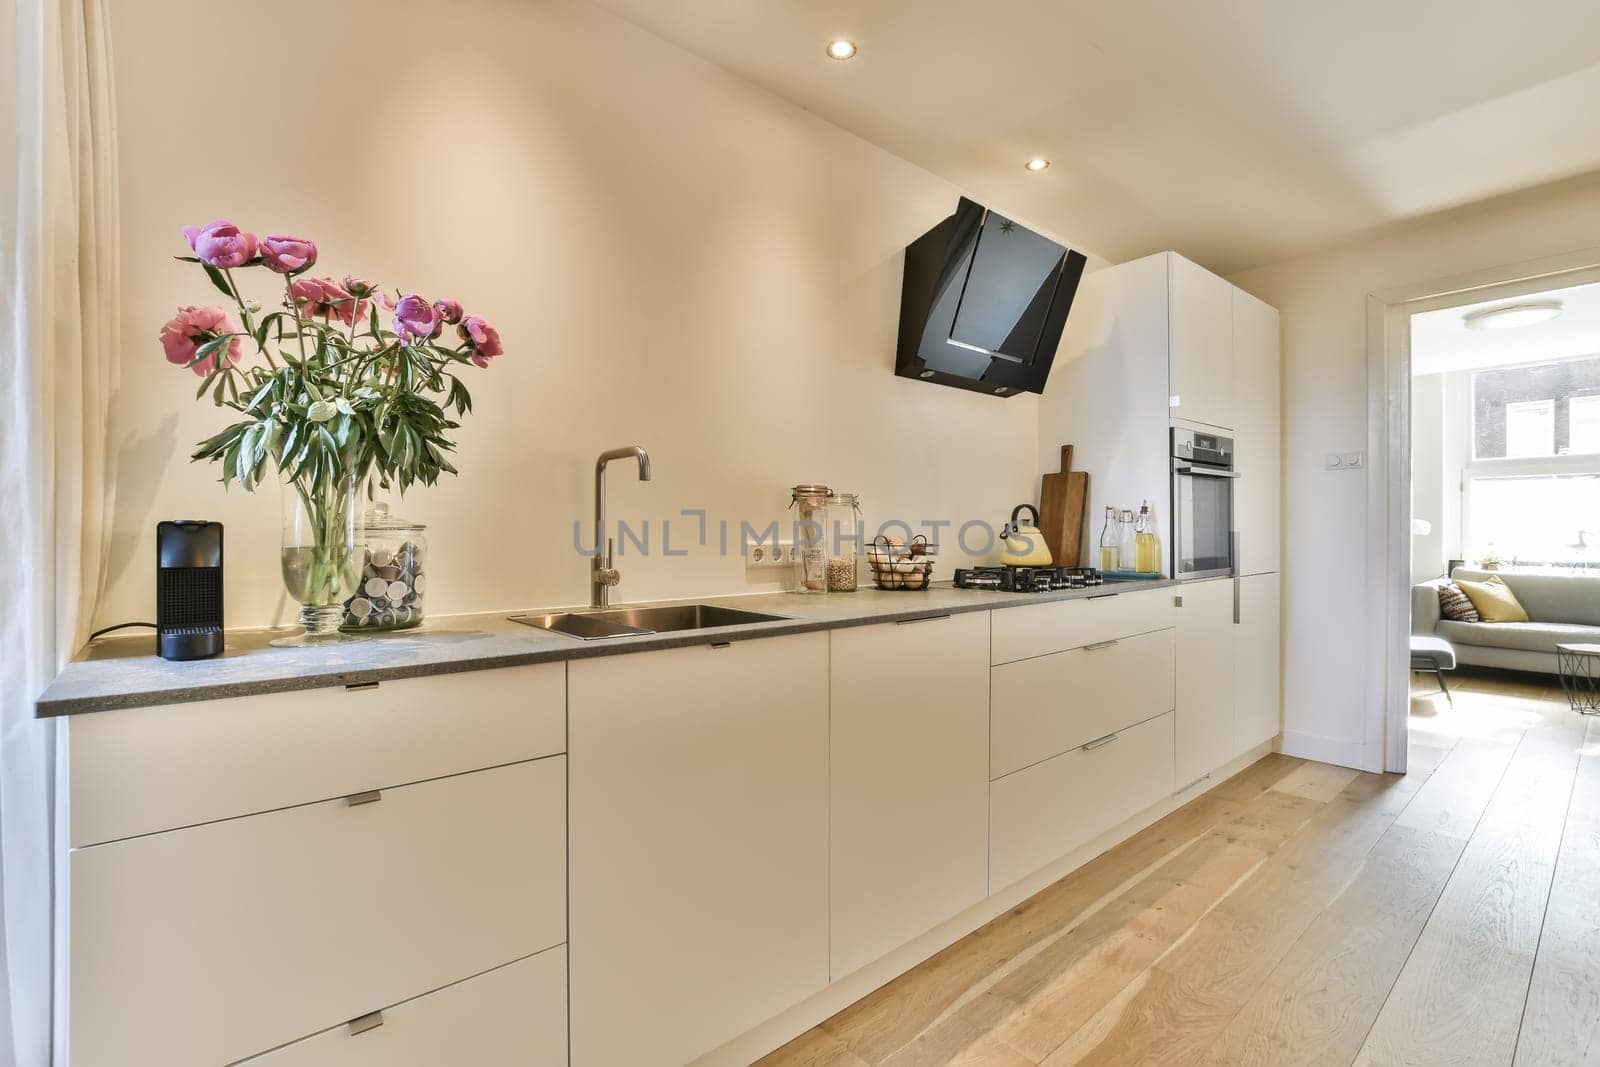 a kitchen with flowers on the counter and tv mounted to the wall in the living room next to the dining area